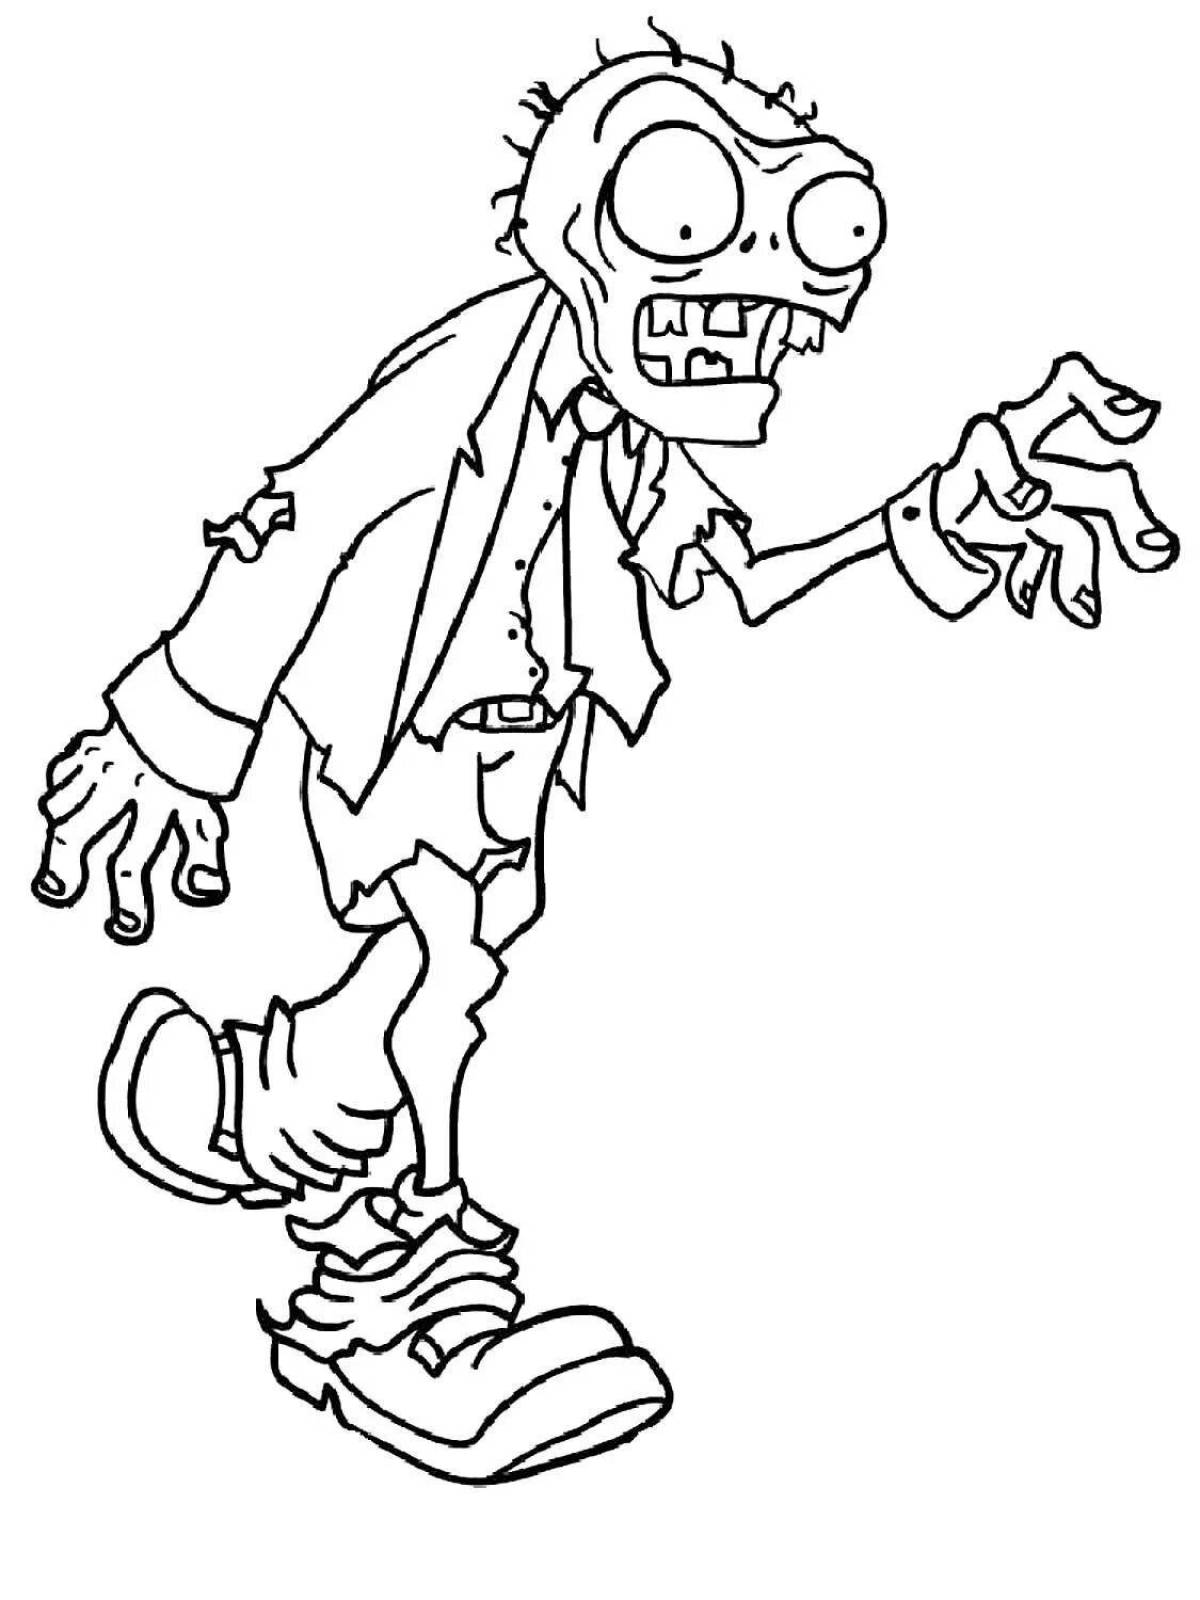 Coloring page of the disgusting zombie ace